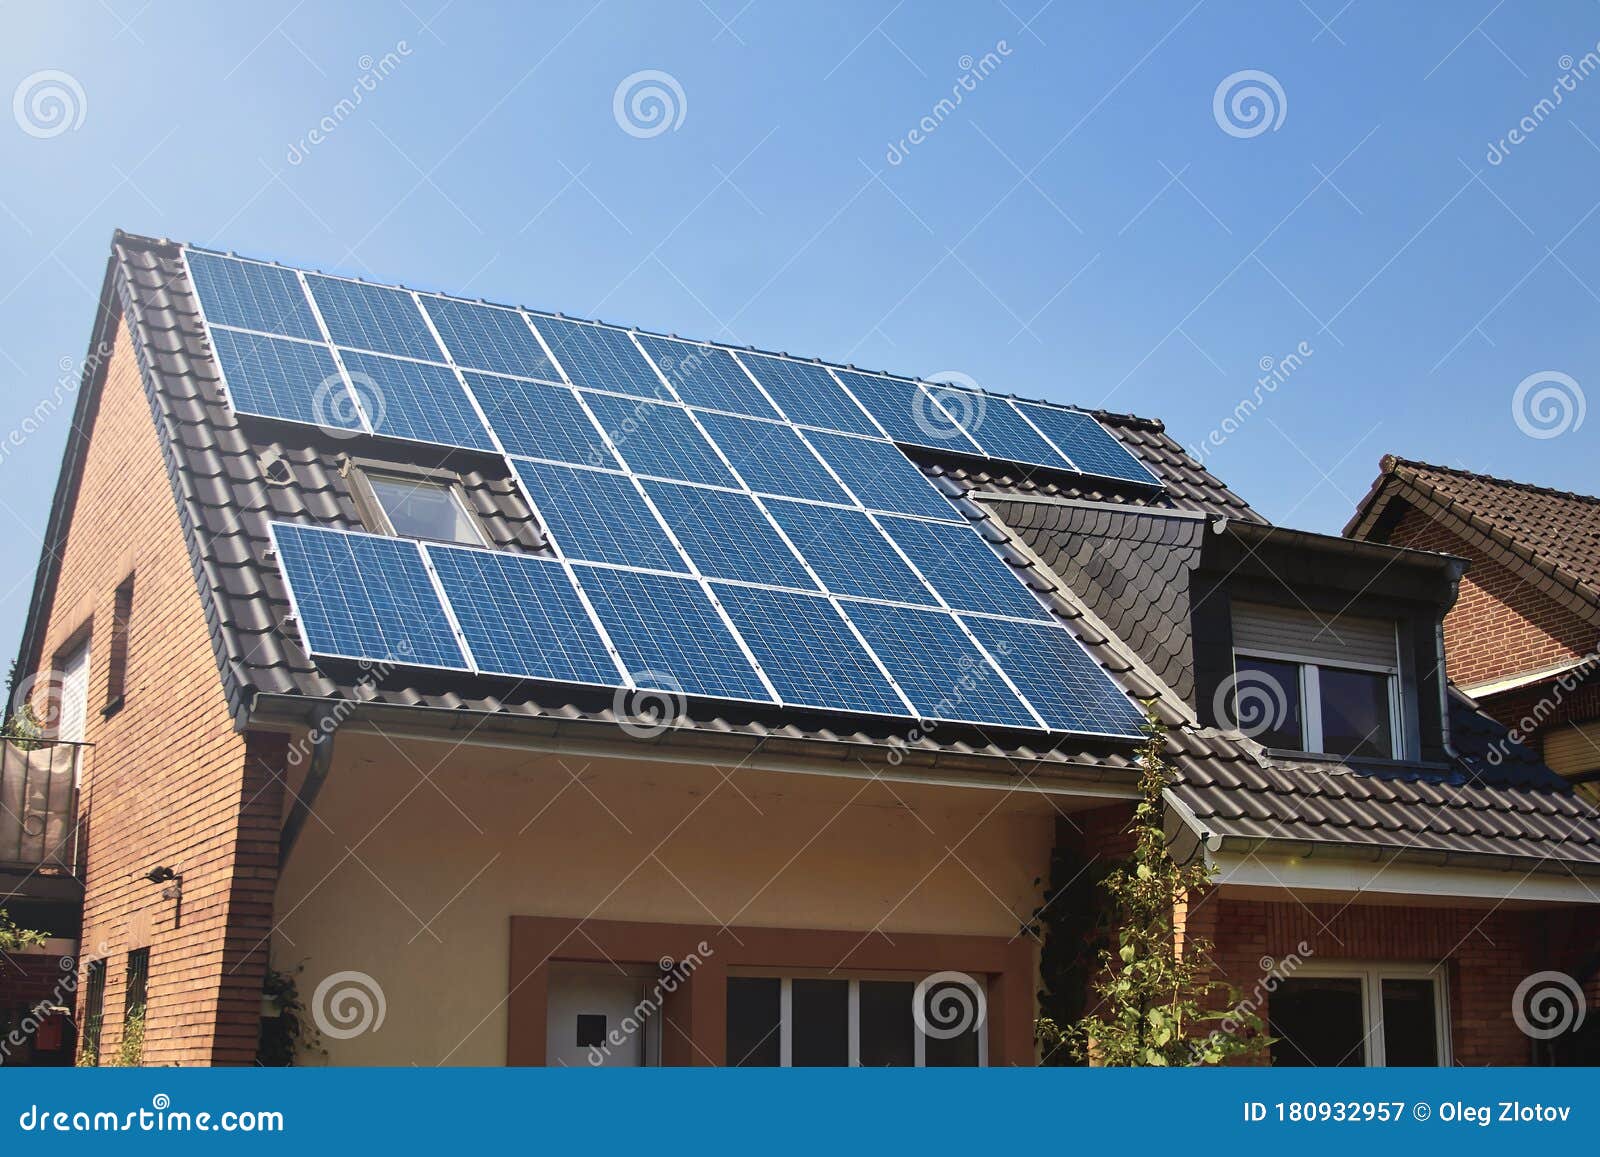 Rooftop Of House With Solar Panel System Installed Sun Electricity Efficient Way Of Getting Energy For Electricity And Water Stock Image Image Of Ecological Produce 180932957